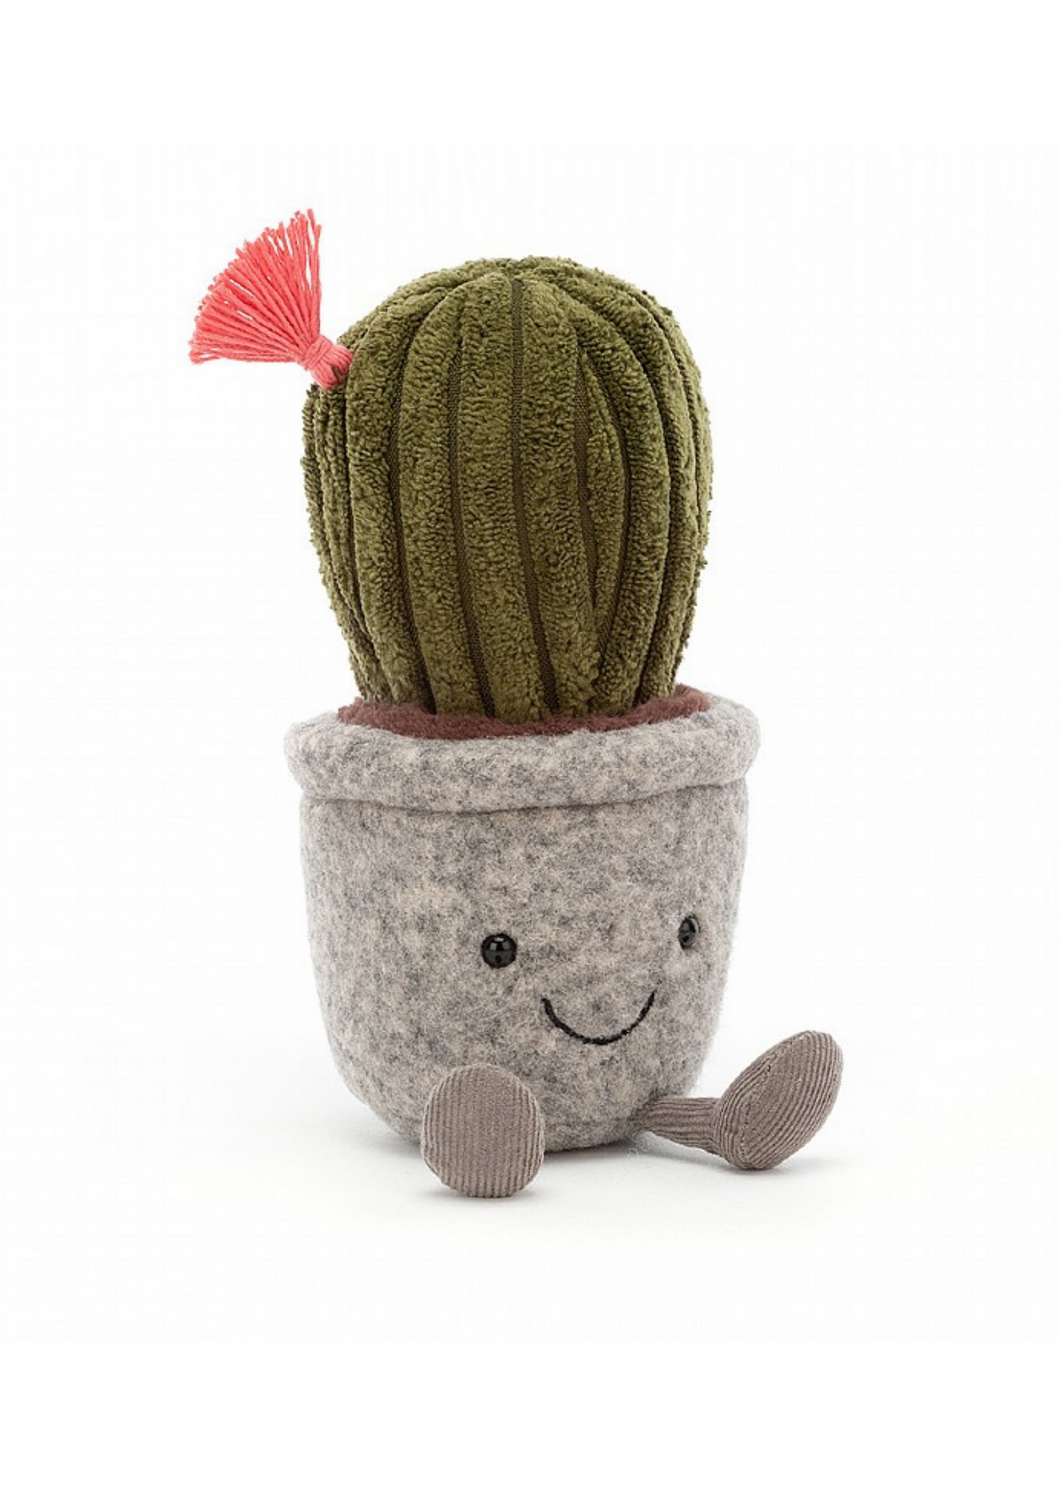 Silly Succulent Cactus - Tigertree